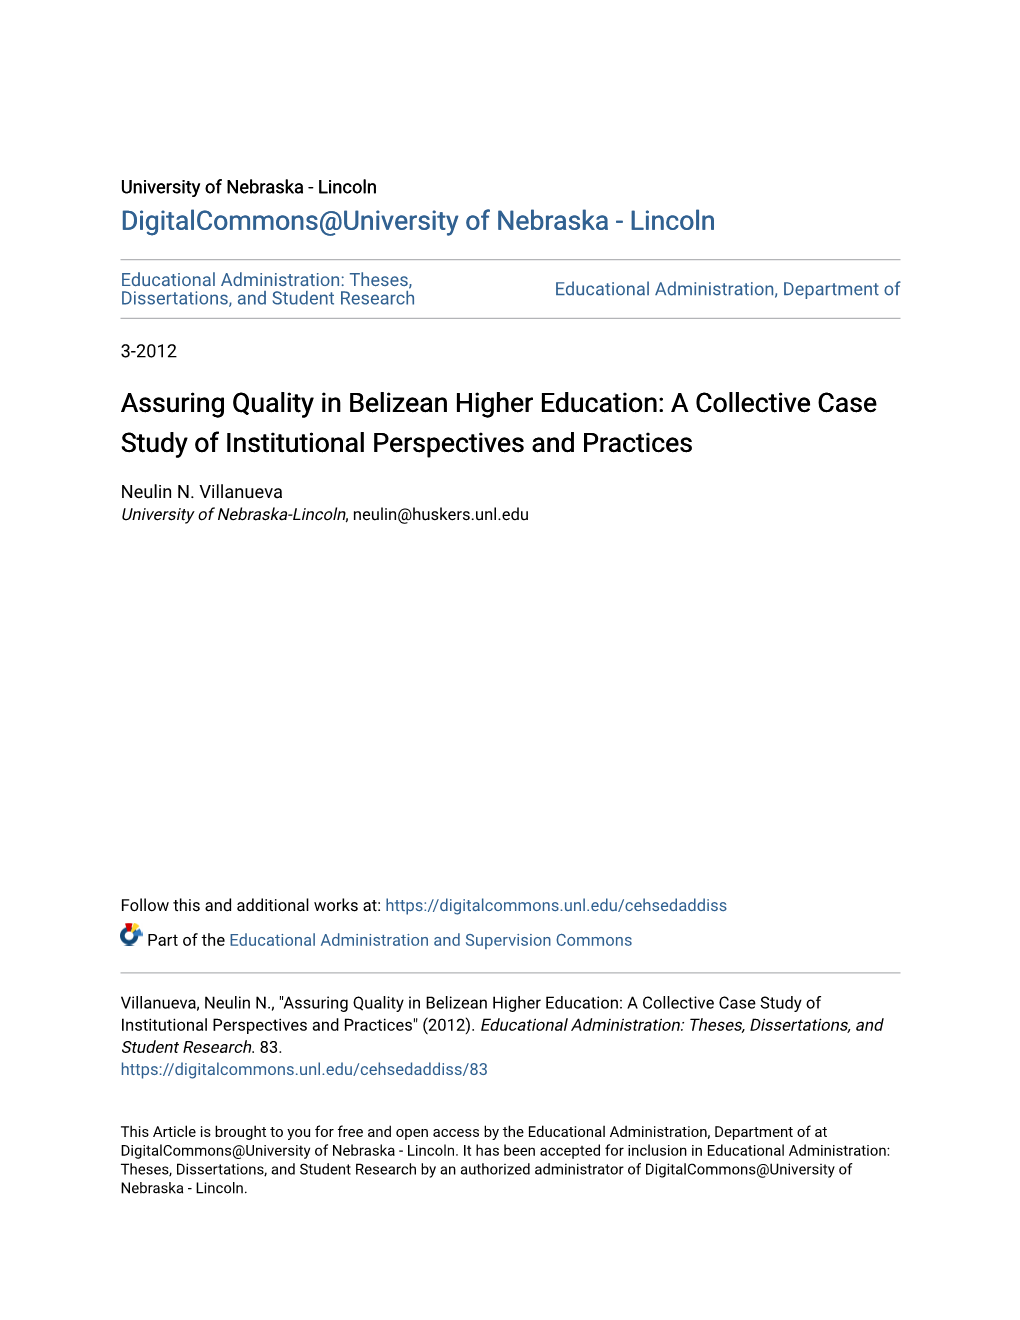 Assuring Quality in Belizean Higher Education: a Collective Case Study of Institutional Perspectives and Practices